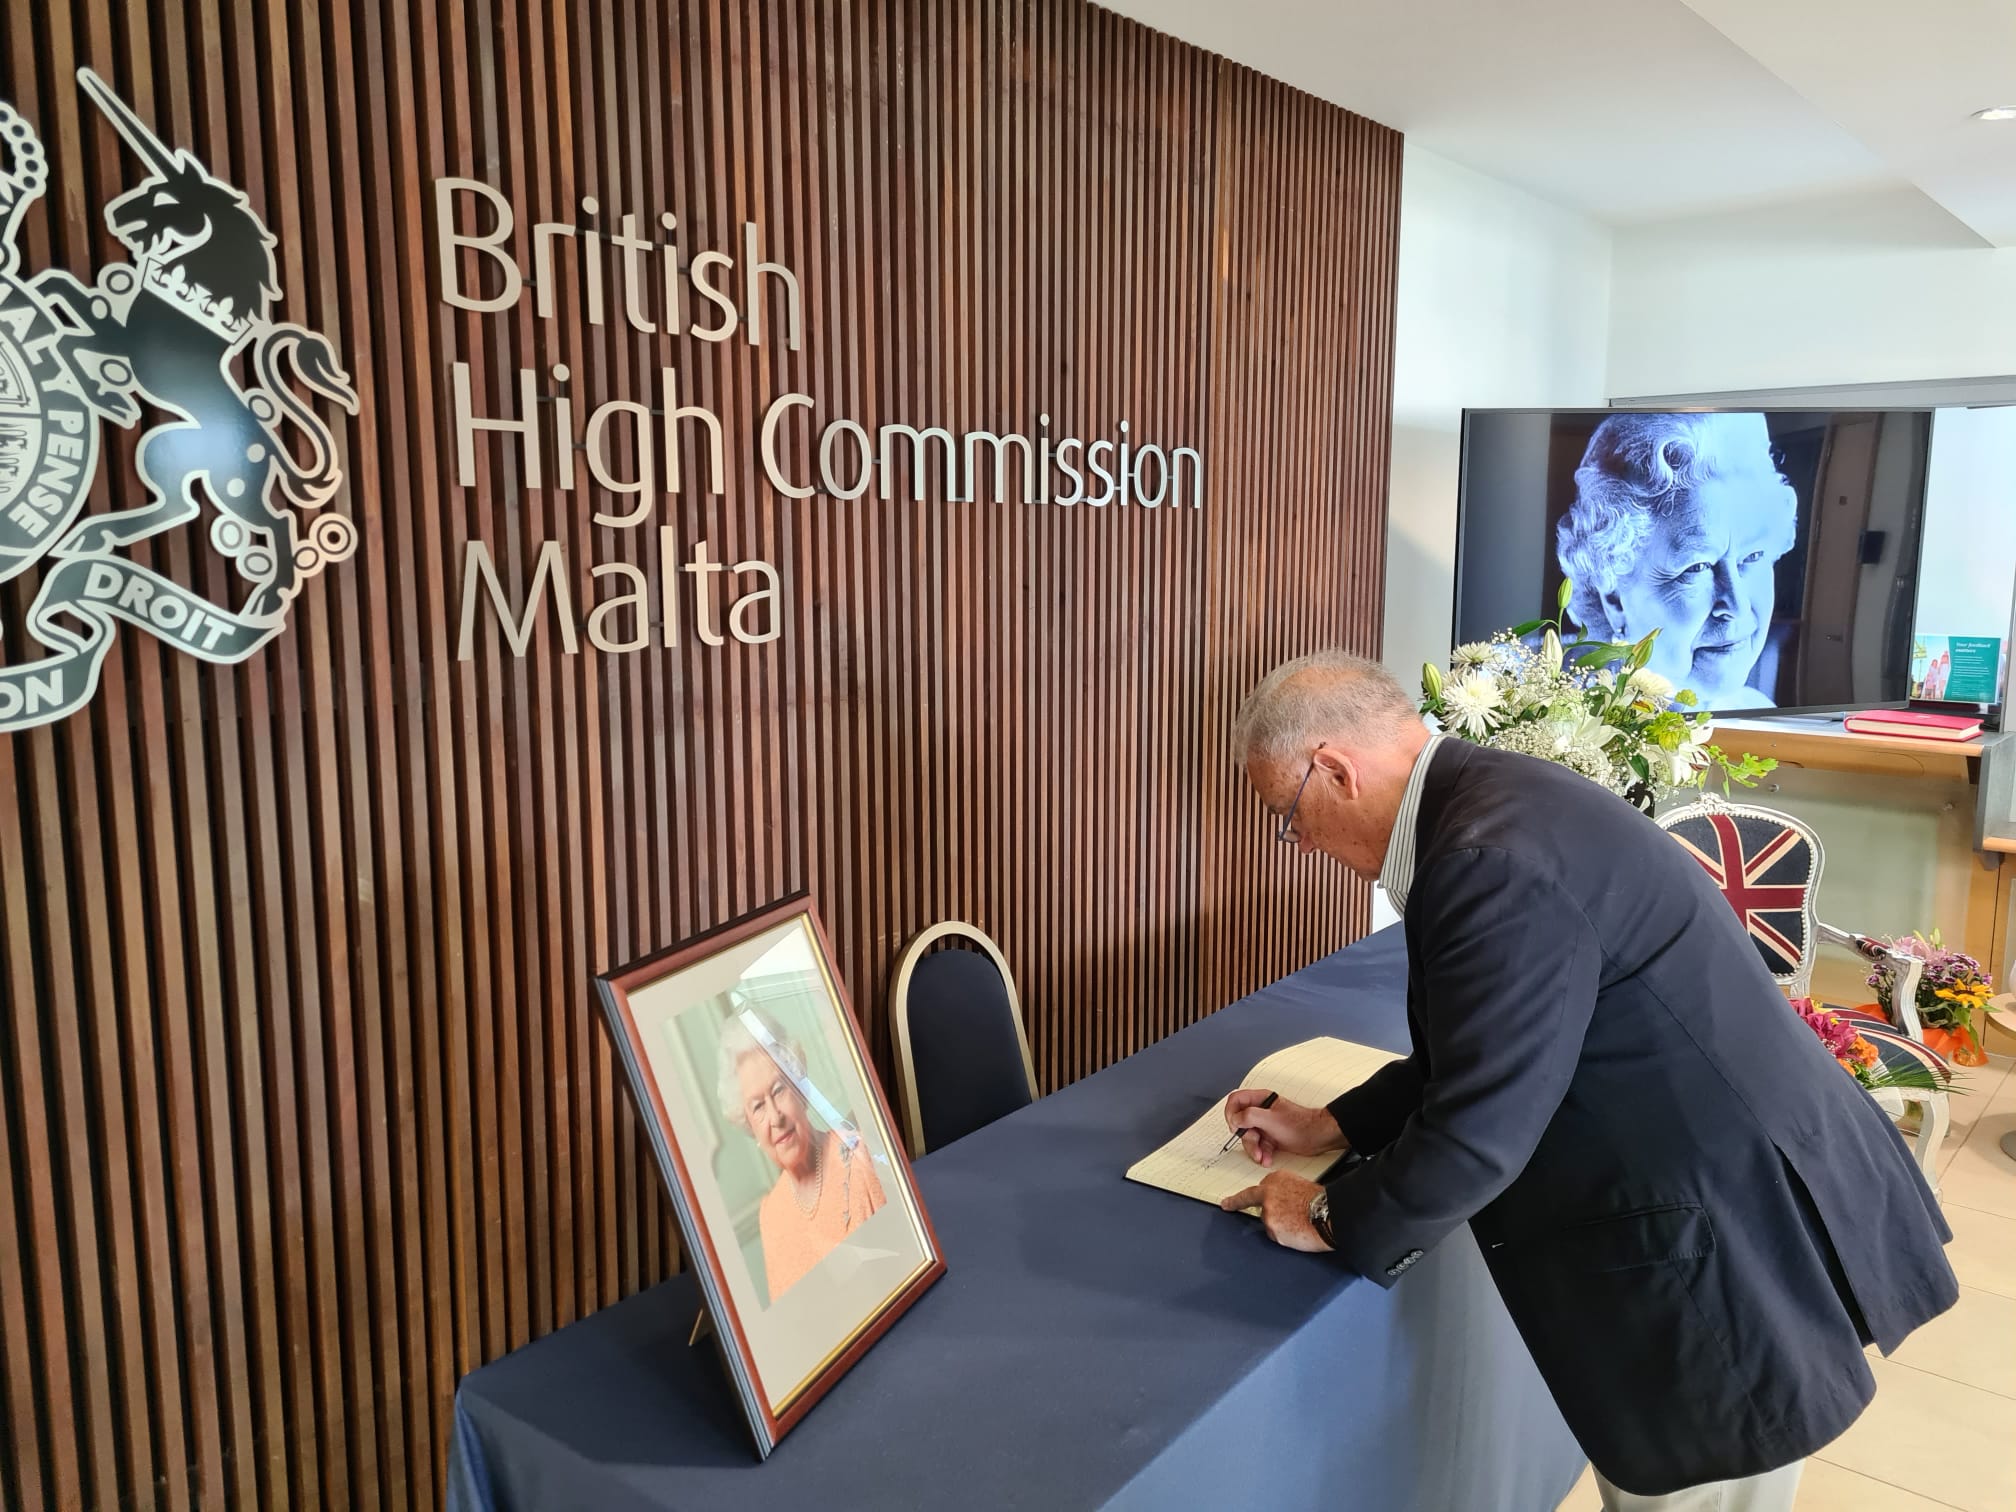 Dr Michael Frendo signs book of condolences at British High Commission